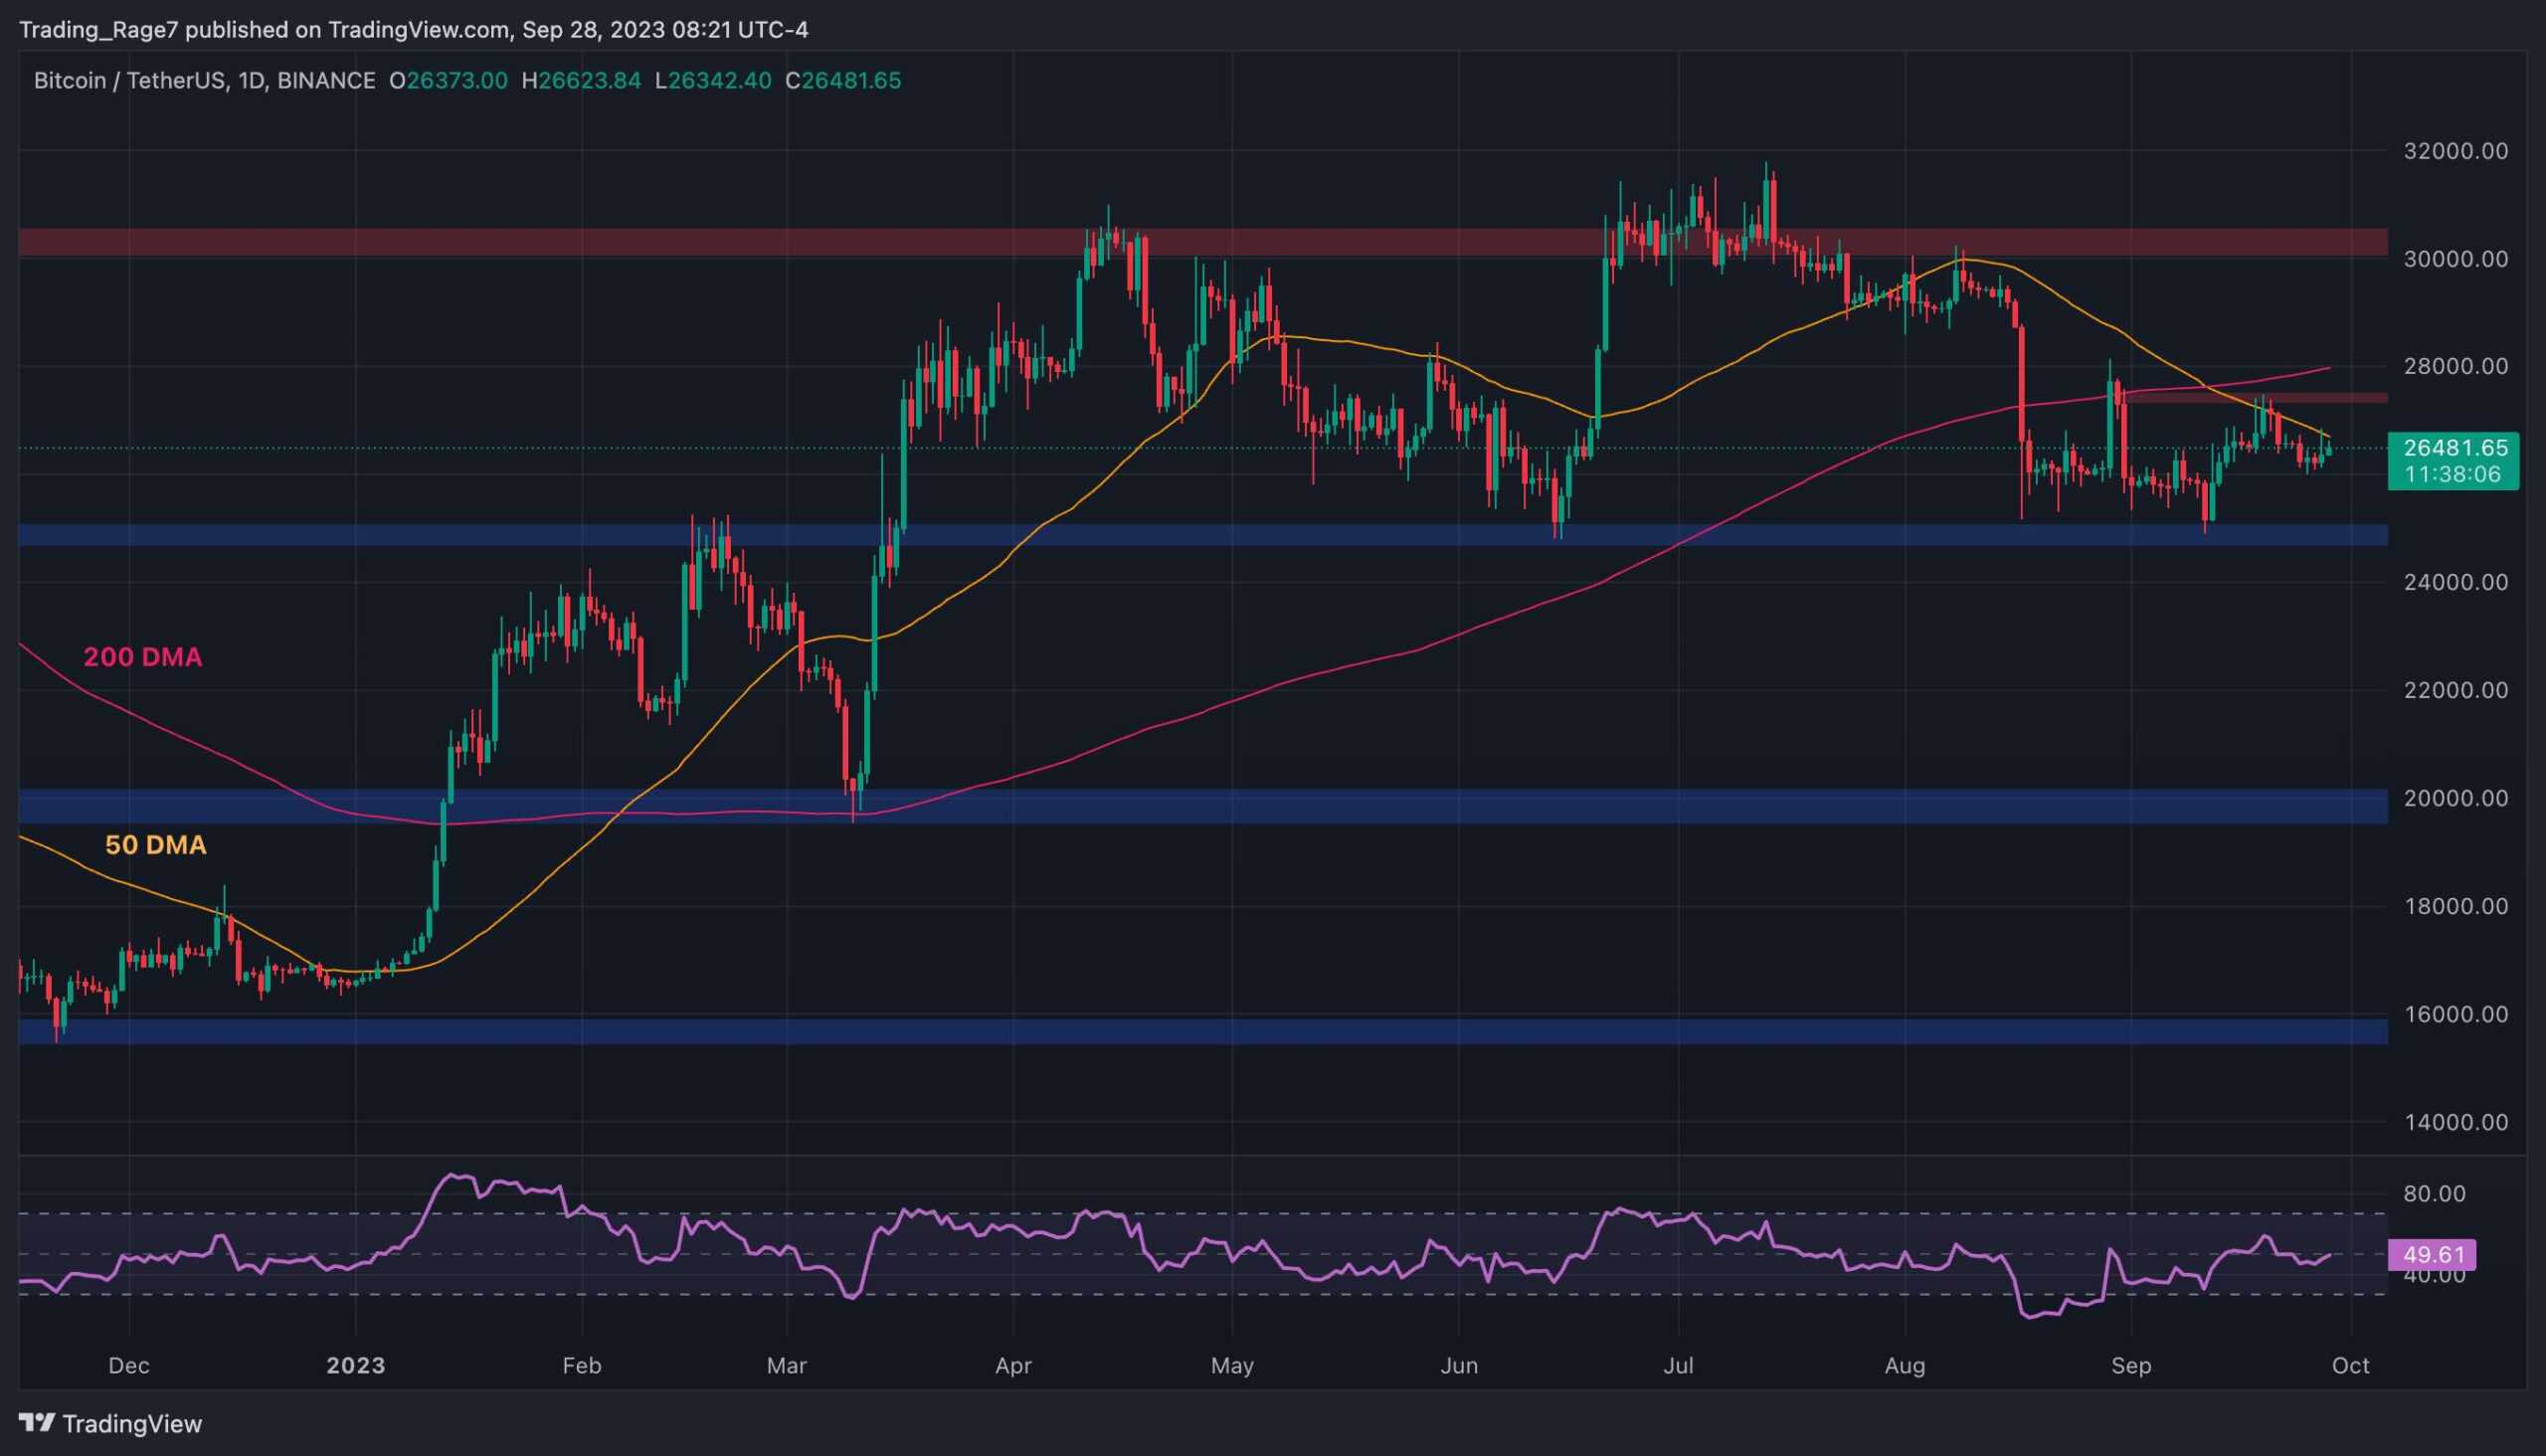 Bitcoin-on-the-verge-of-a-massive-move,-but-whic-way?-(btc-price-analysis)